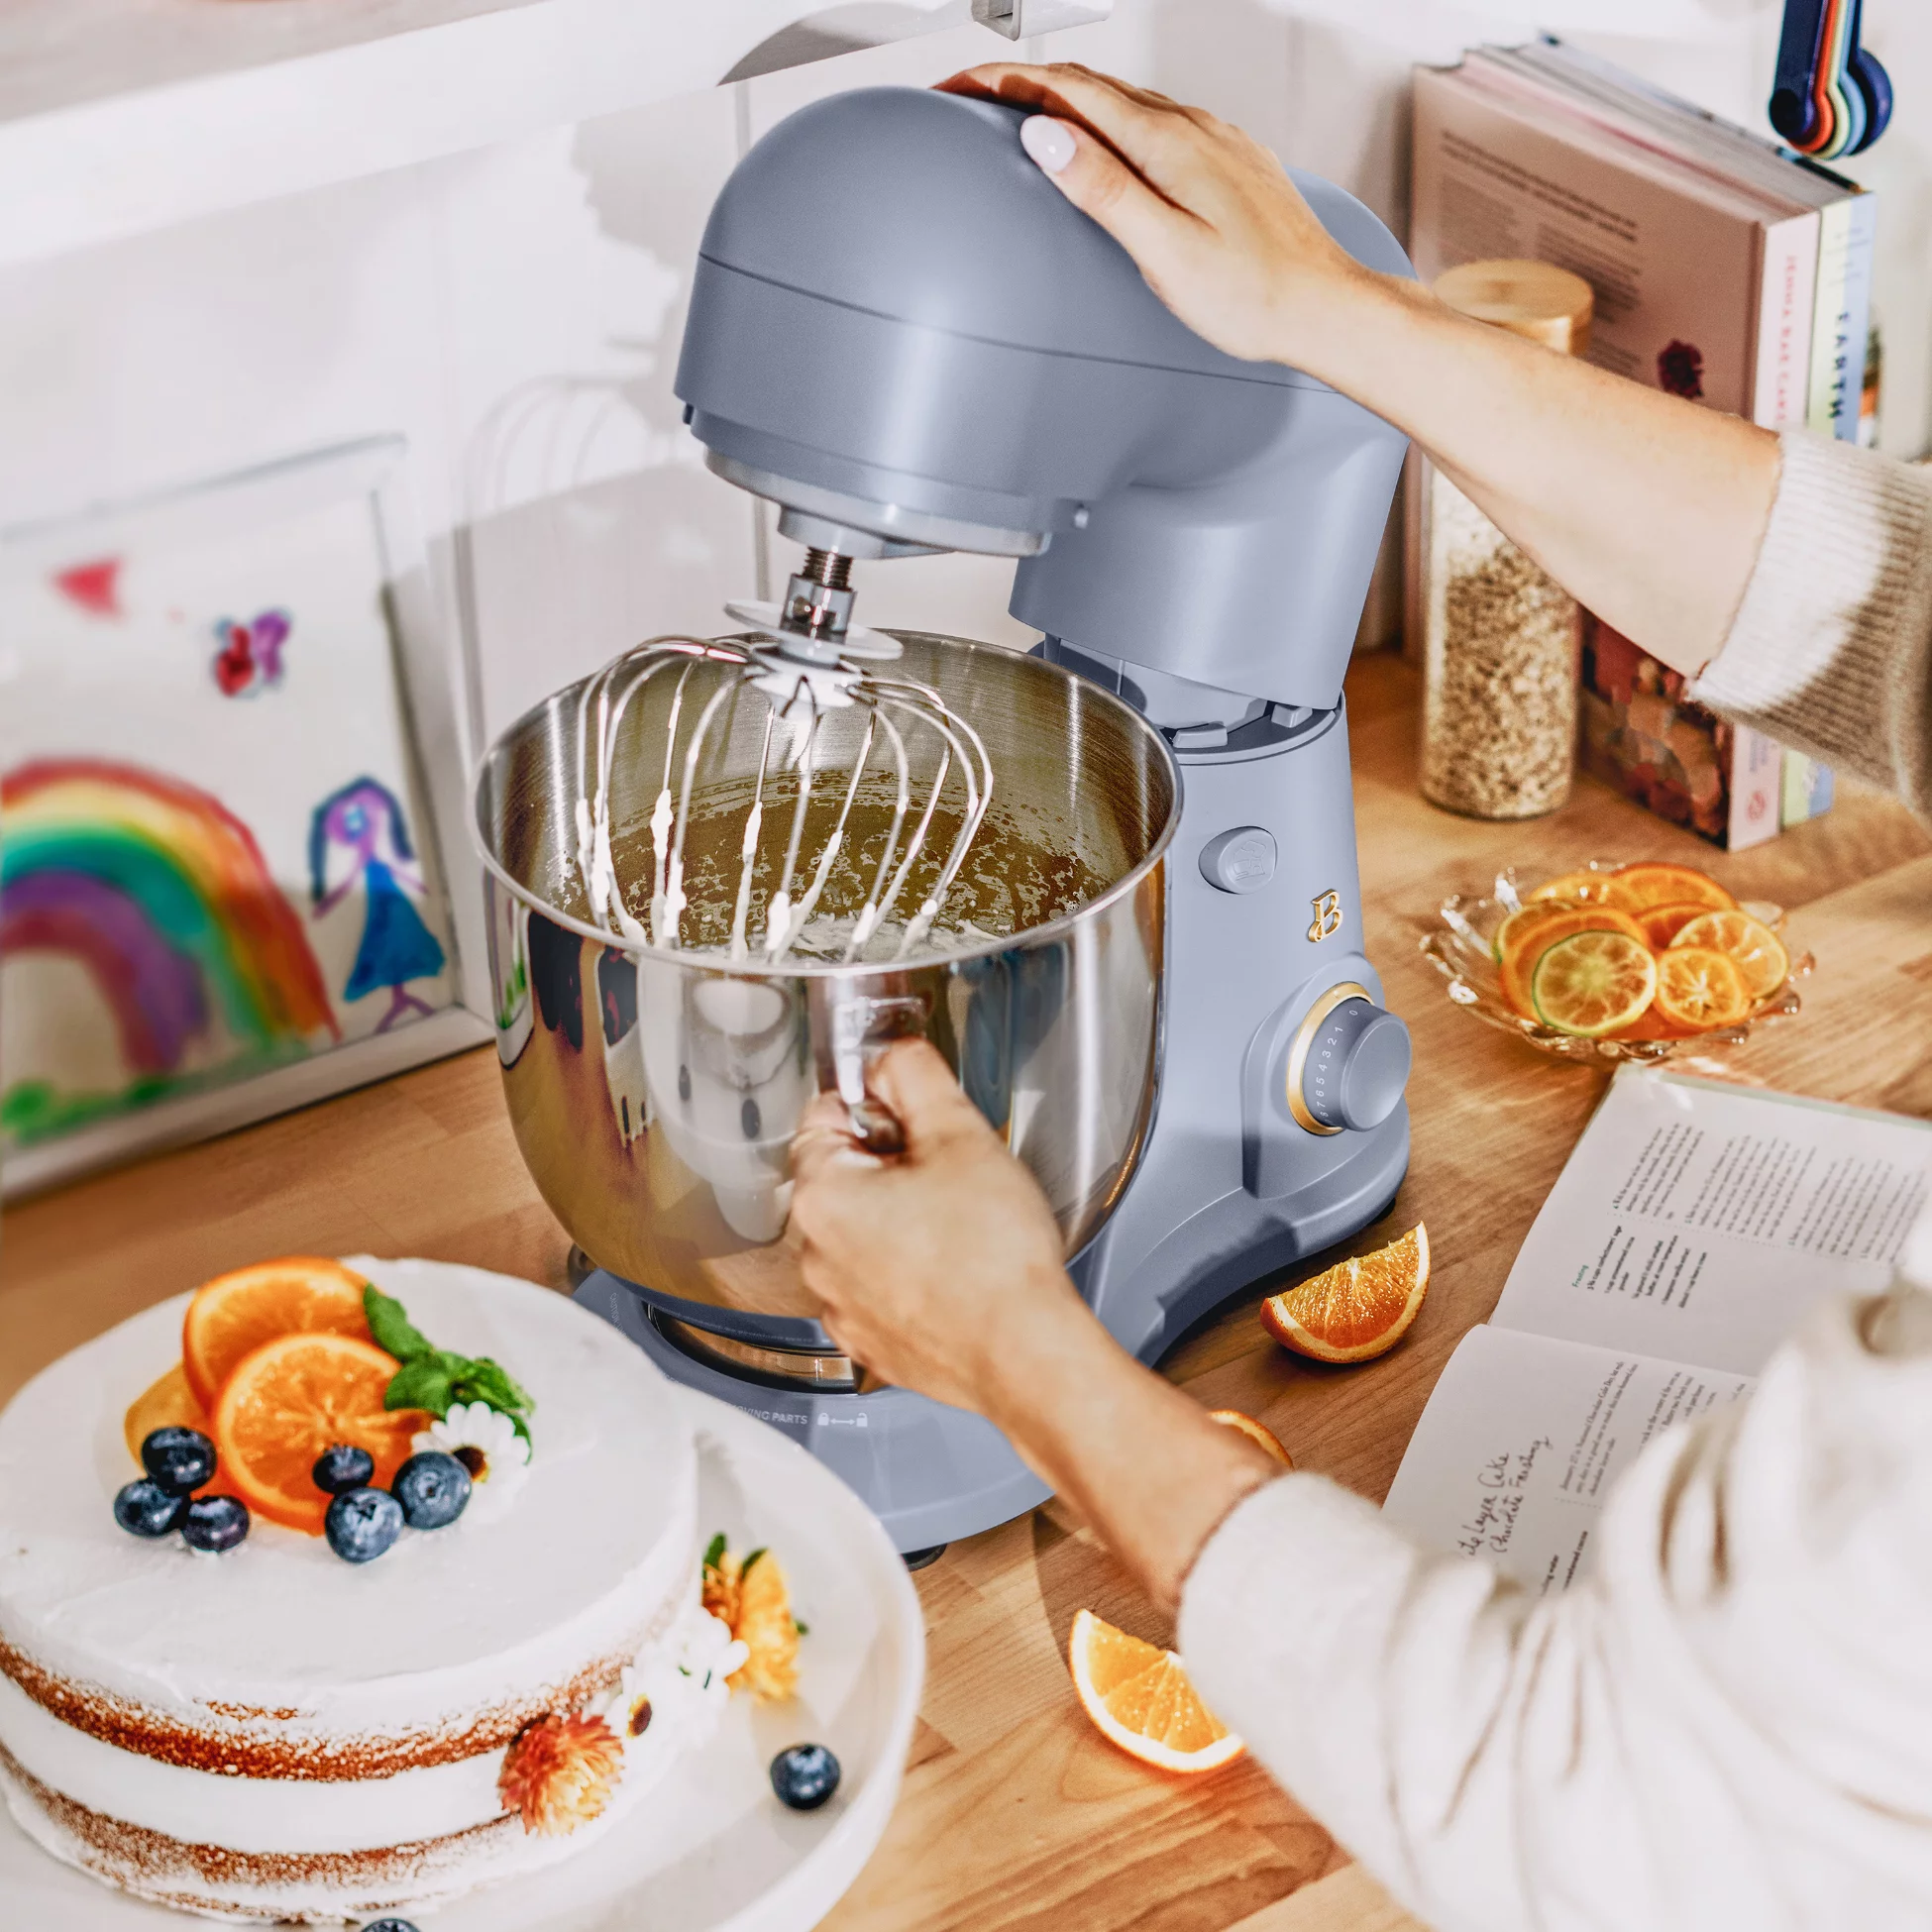 GE Sapphire Blue Compact Stand Mixer - G8MSAAS1RRS